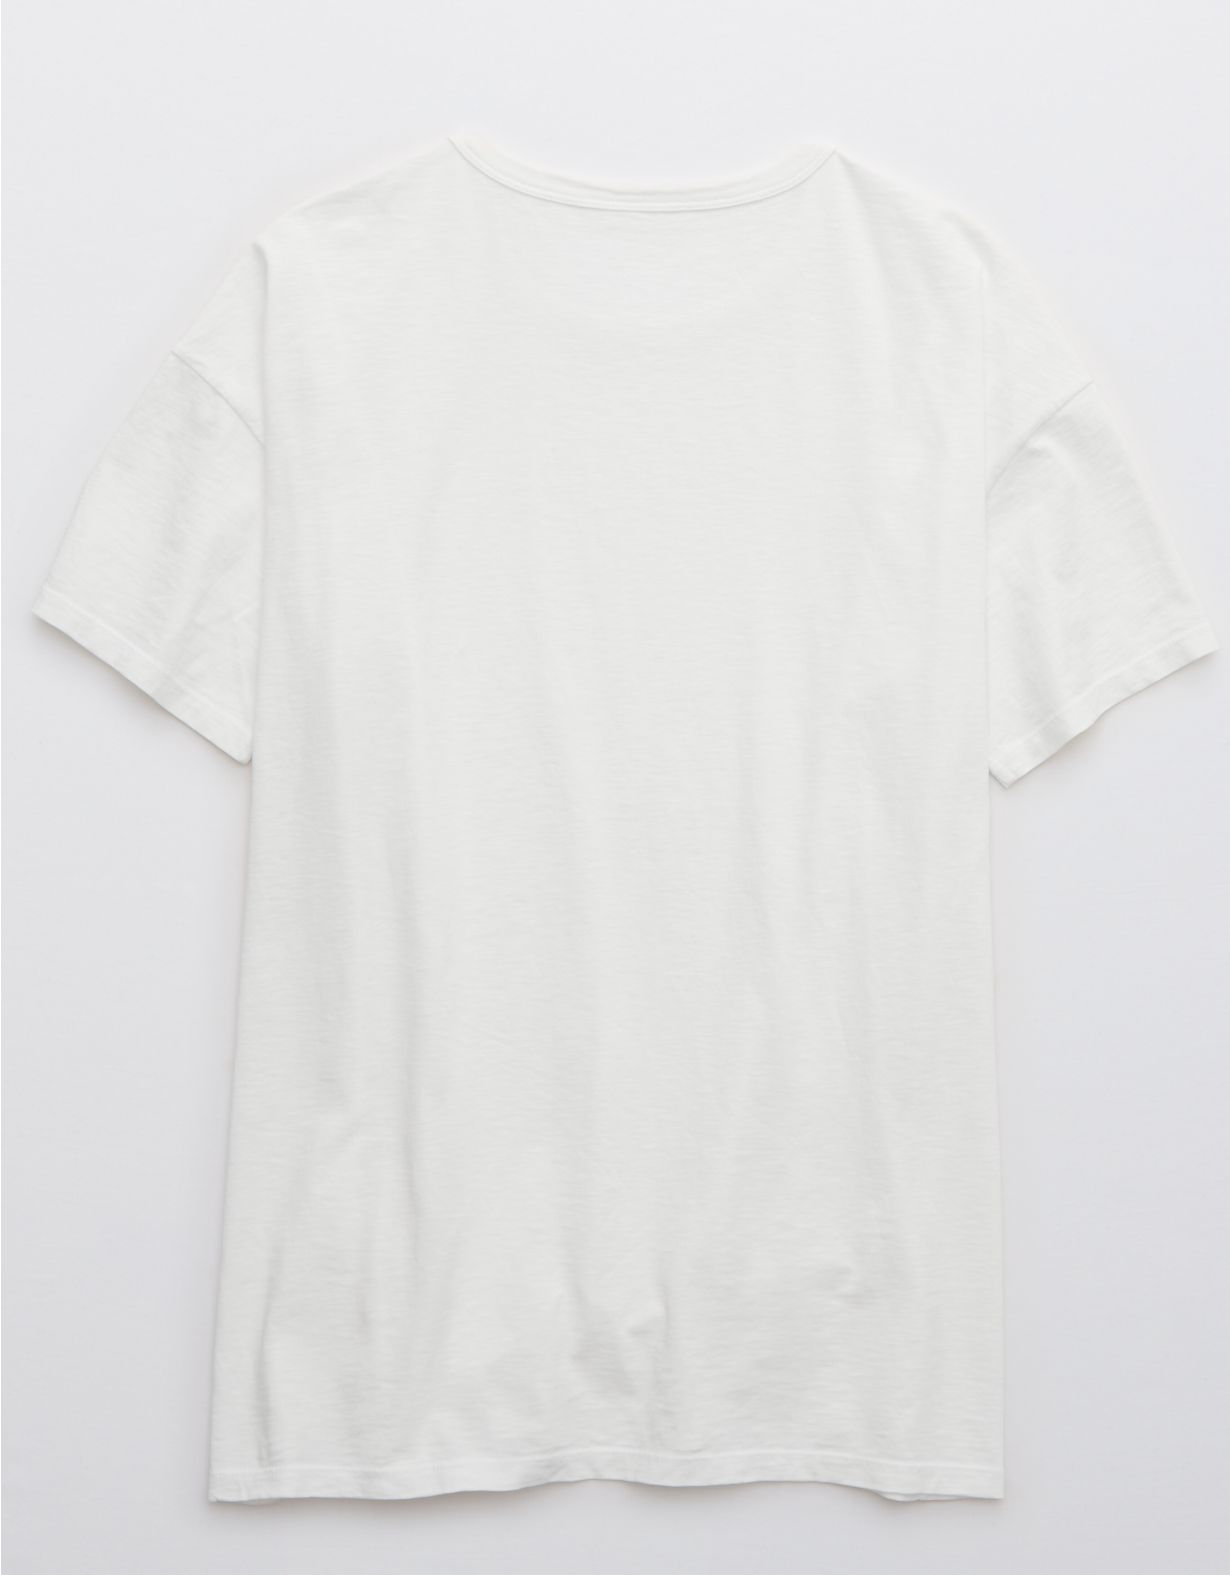 Aerie Real Foundation T-Shirt